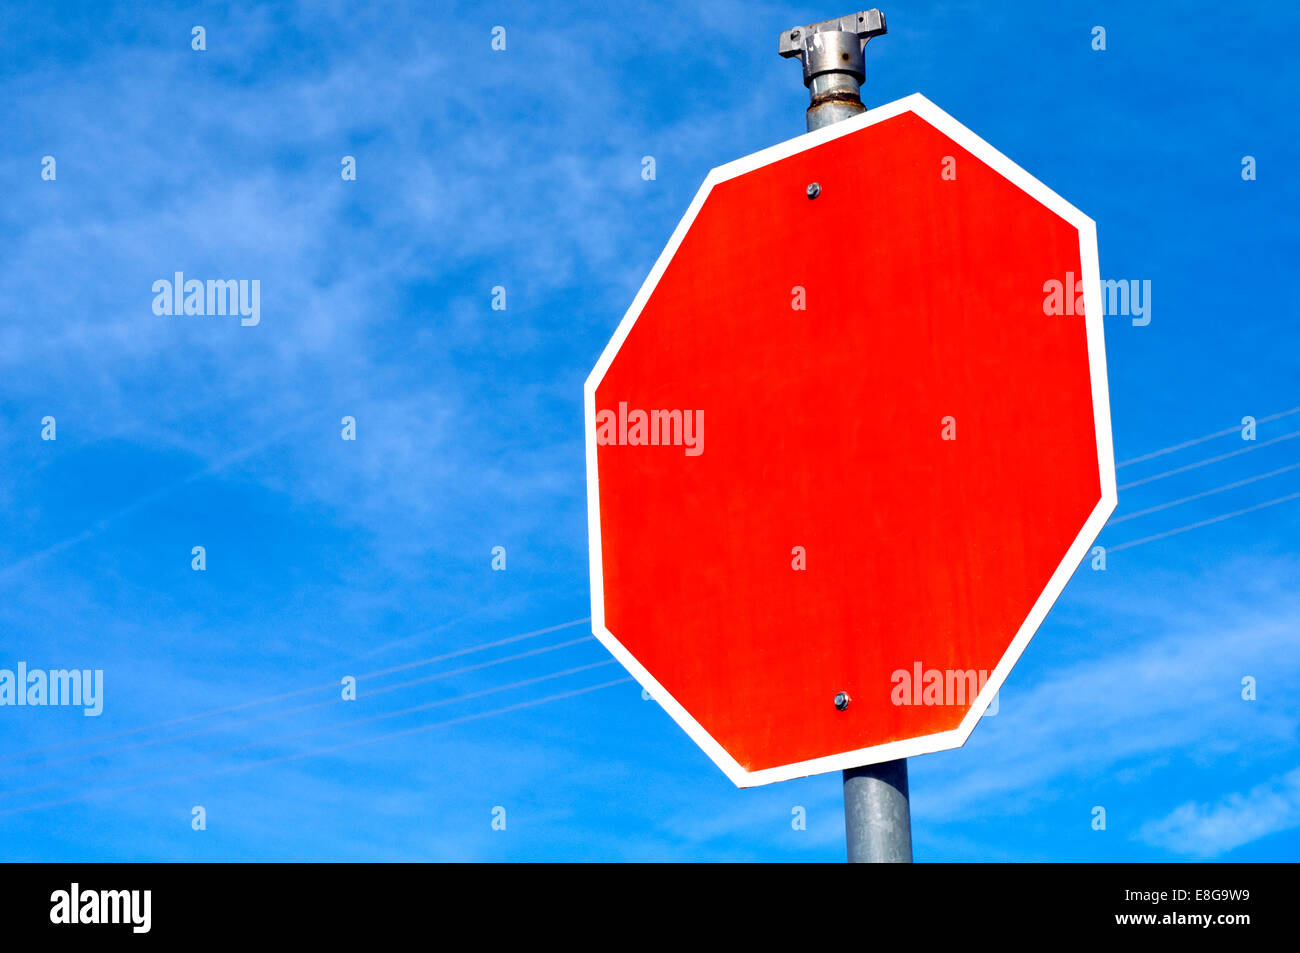 Blank red road sign Stock Photo